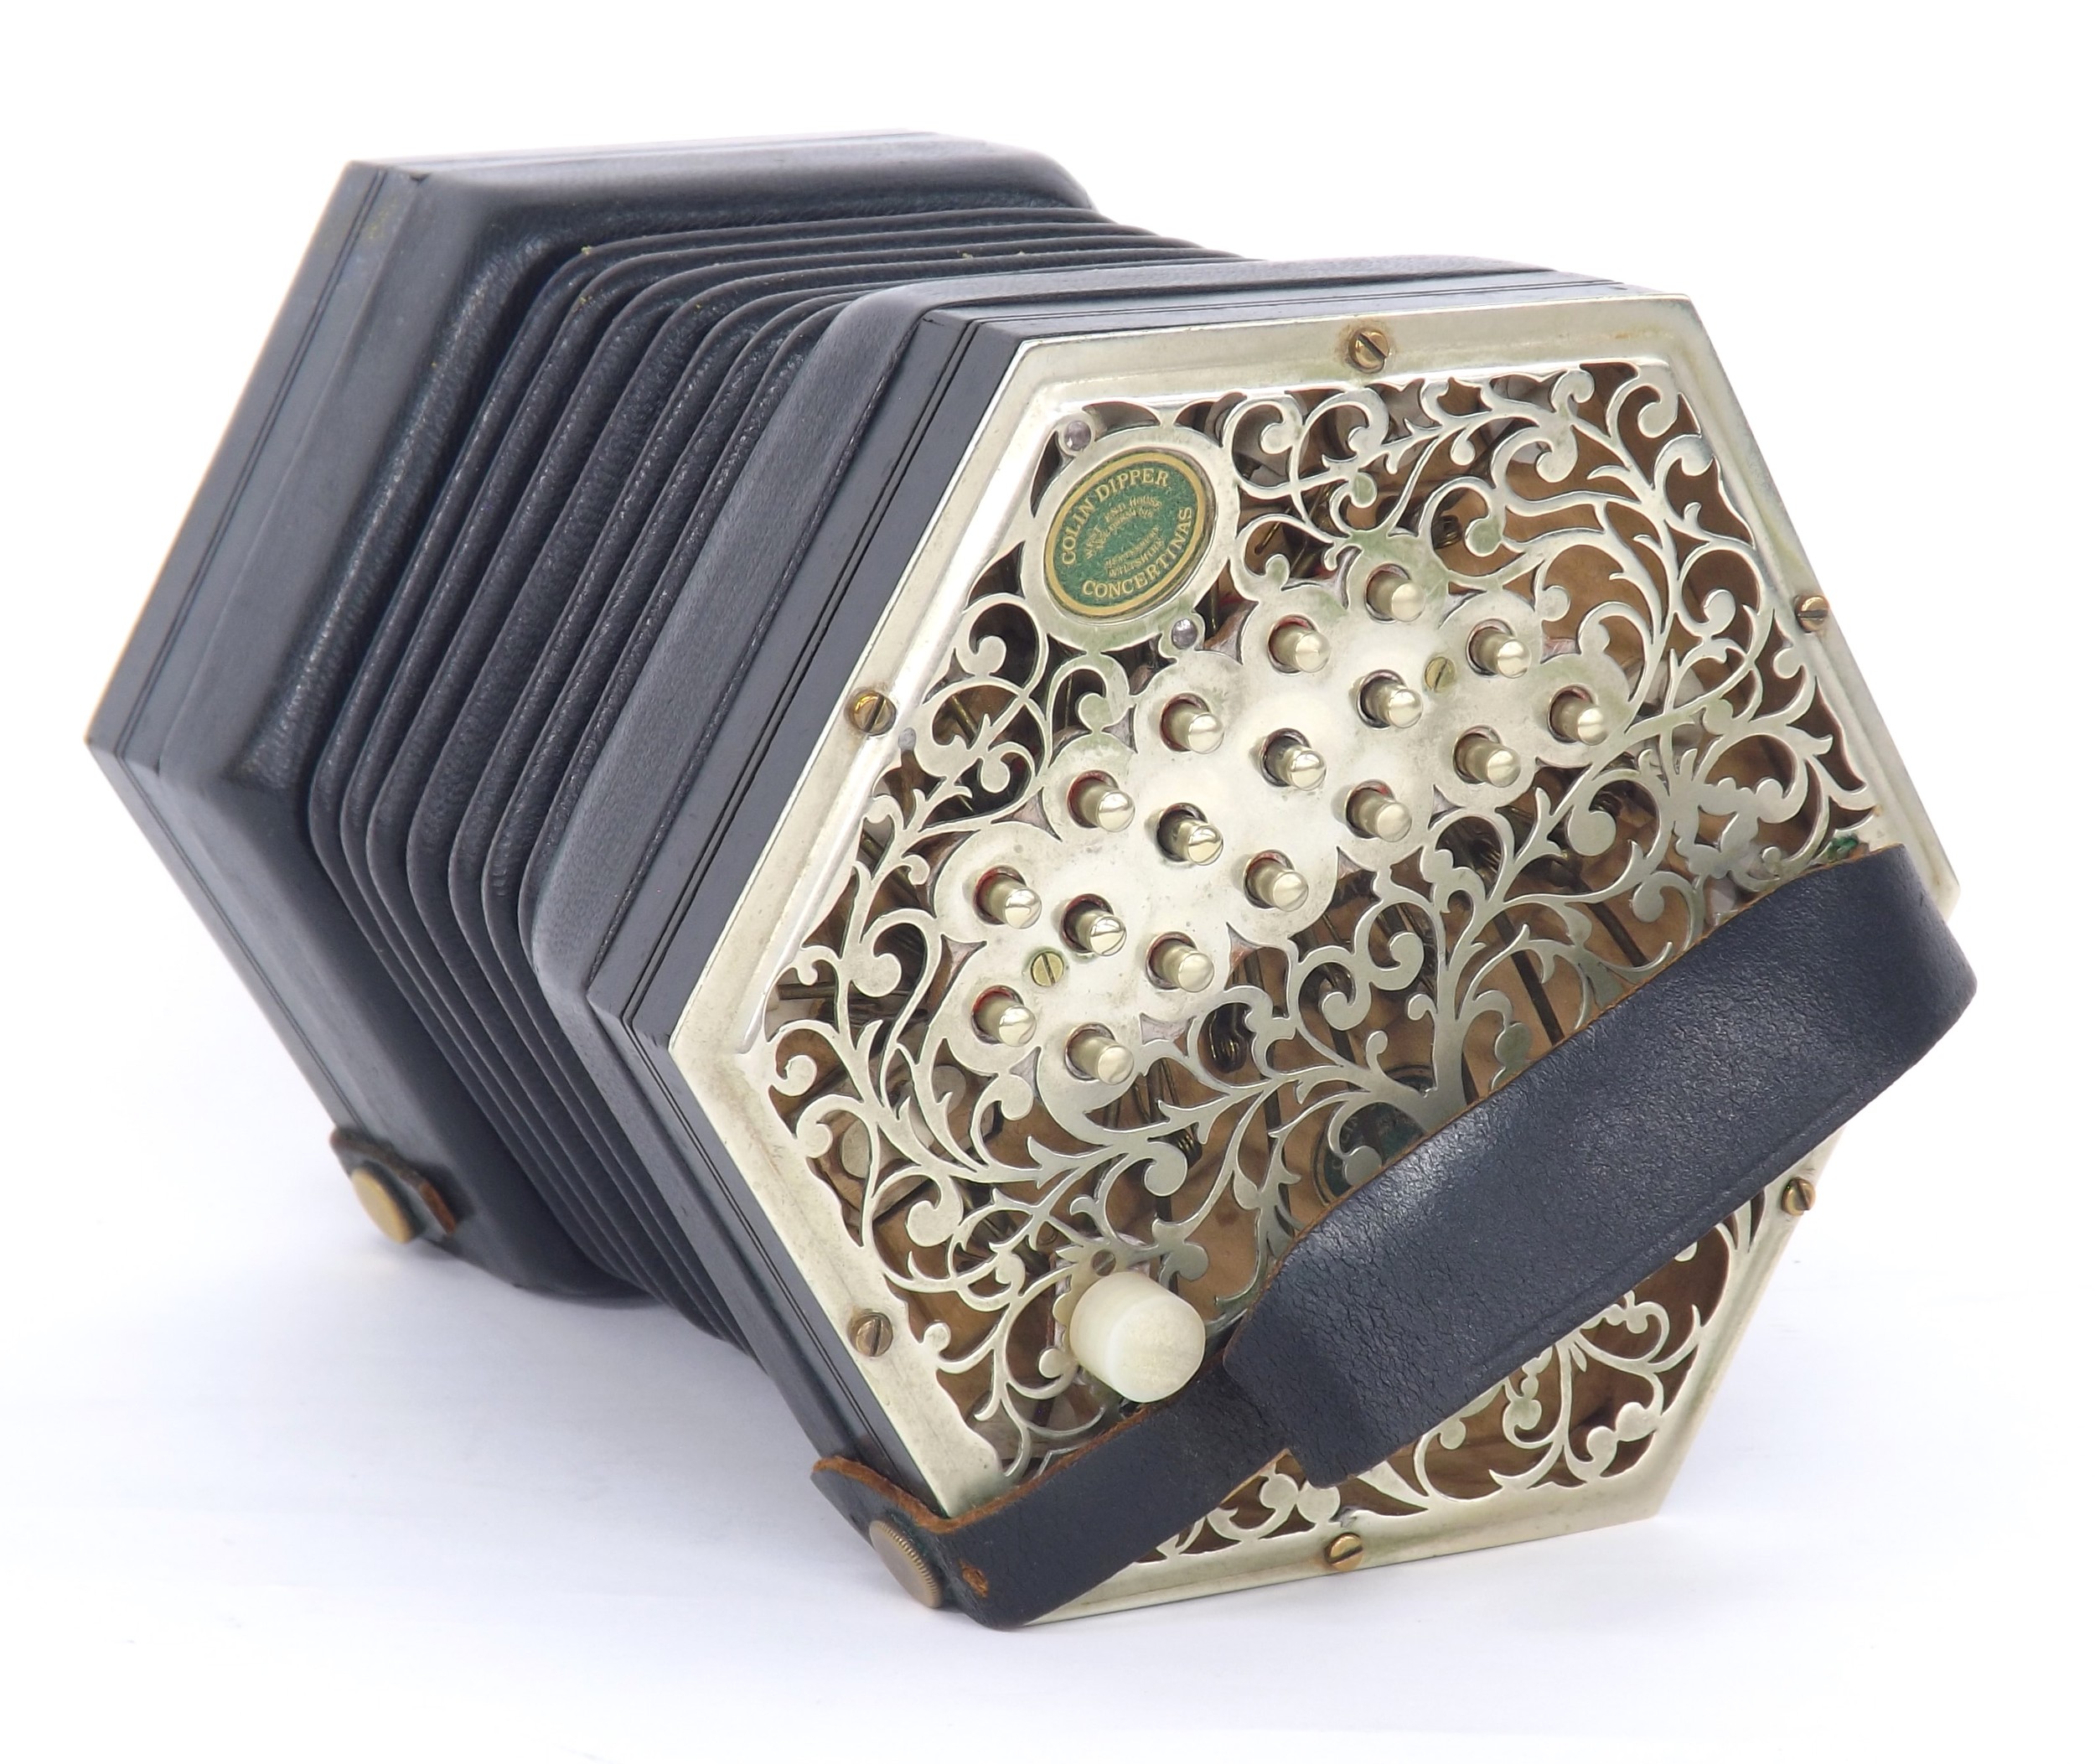 Fine Anglo concertina by and labelled Colin Dipper, no. 103, with thirty-four metal buttons on